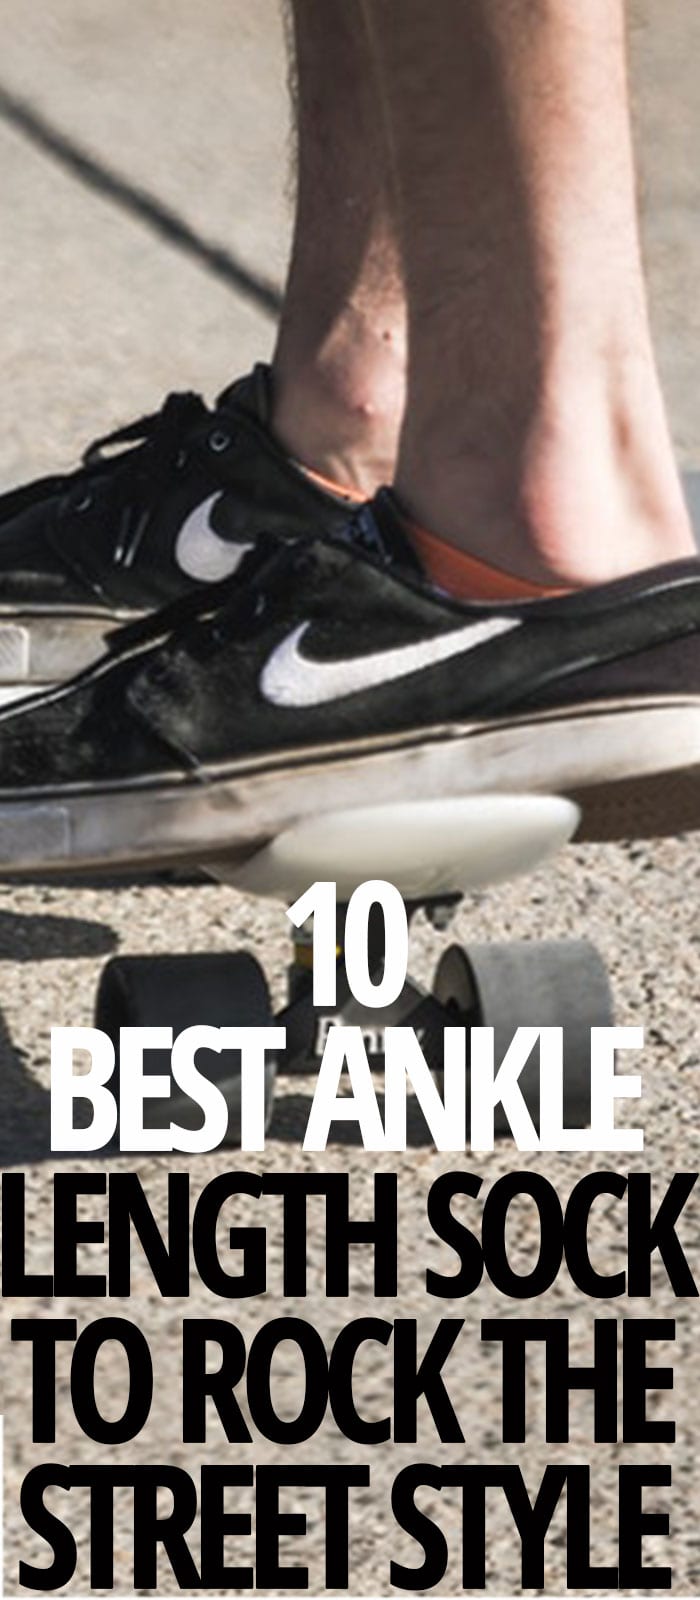 BEST ANKLE LENGTH SOCKS TO ROCK THE STREET STYLE